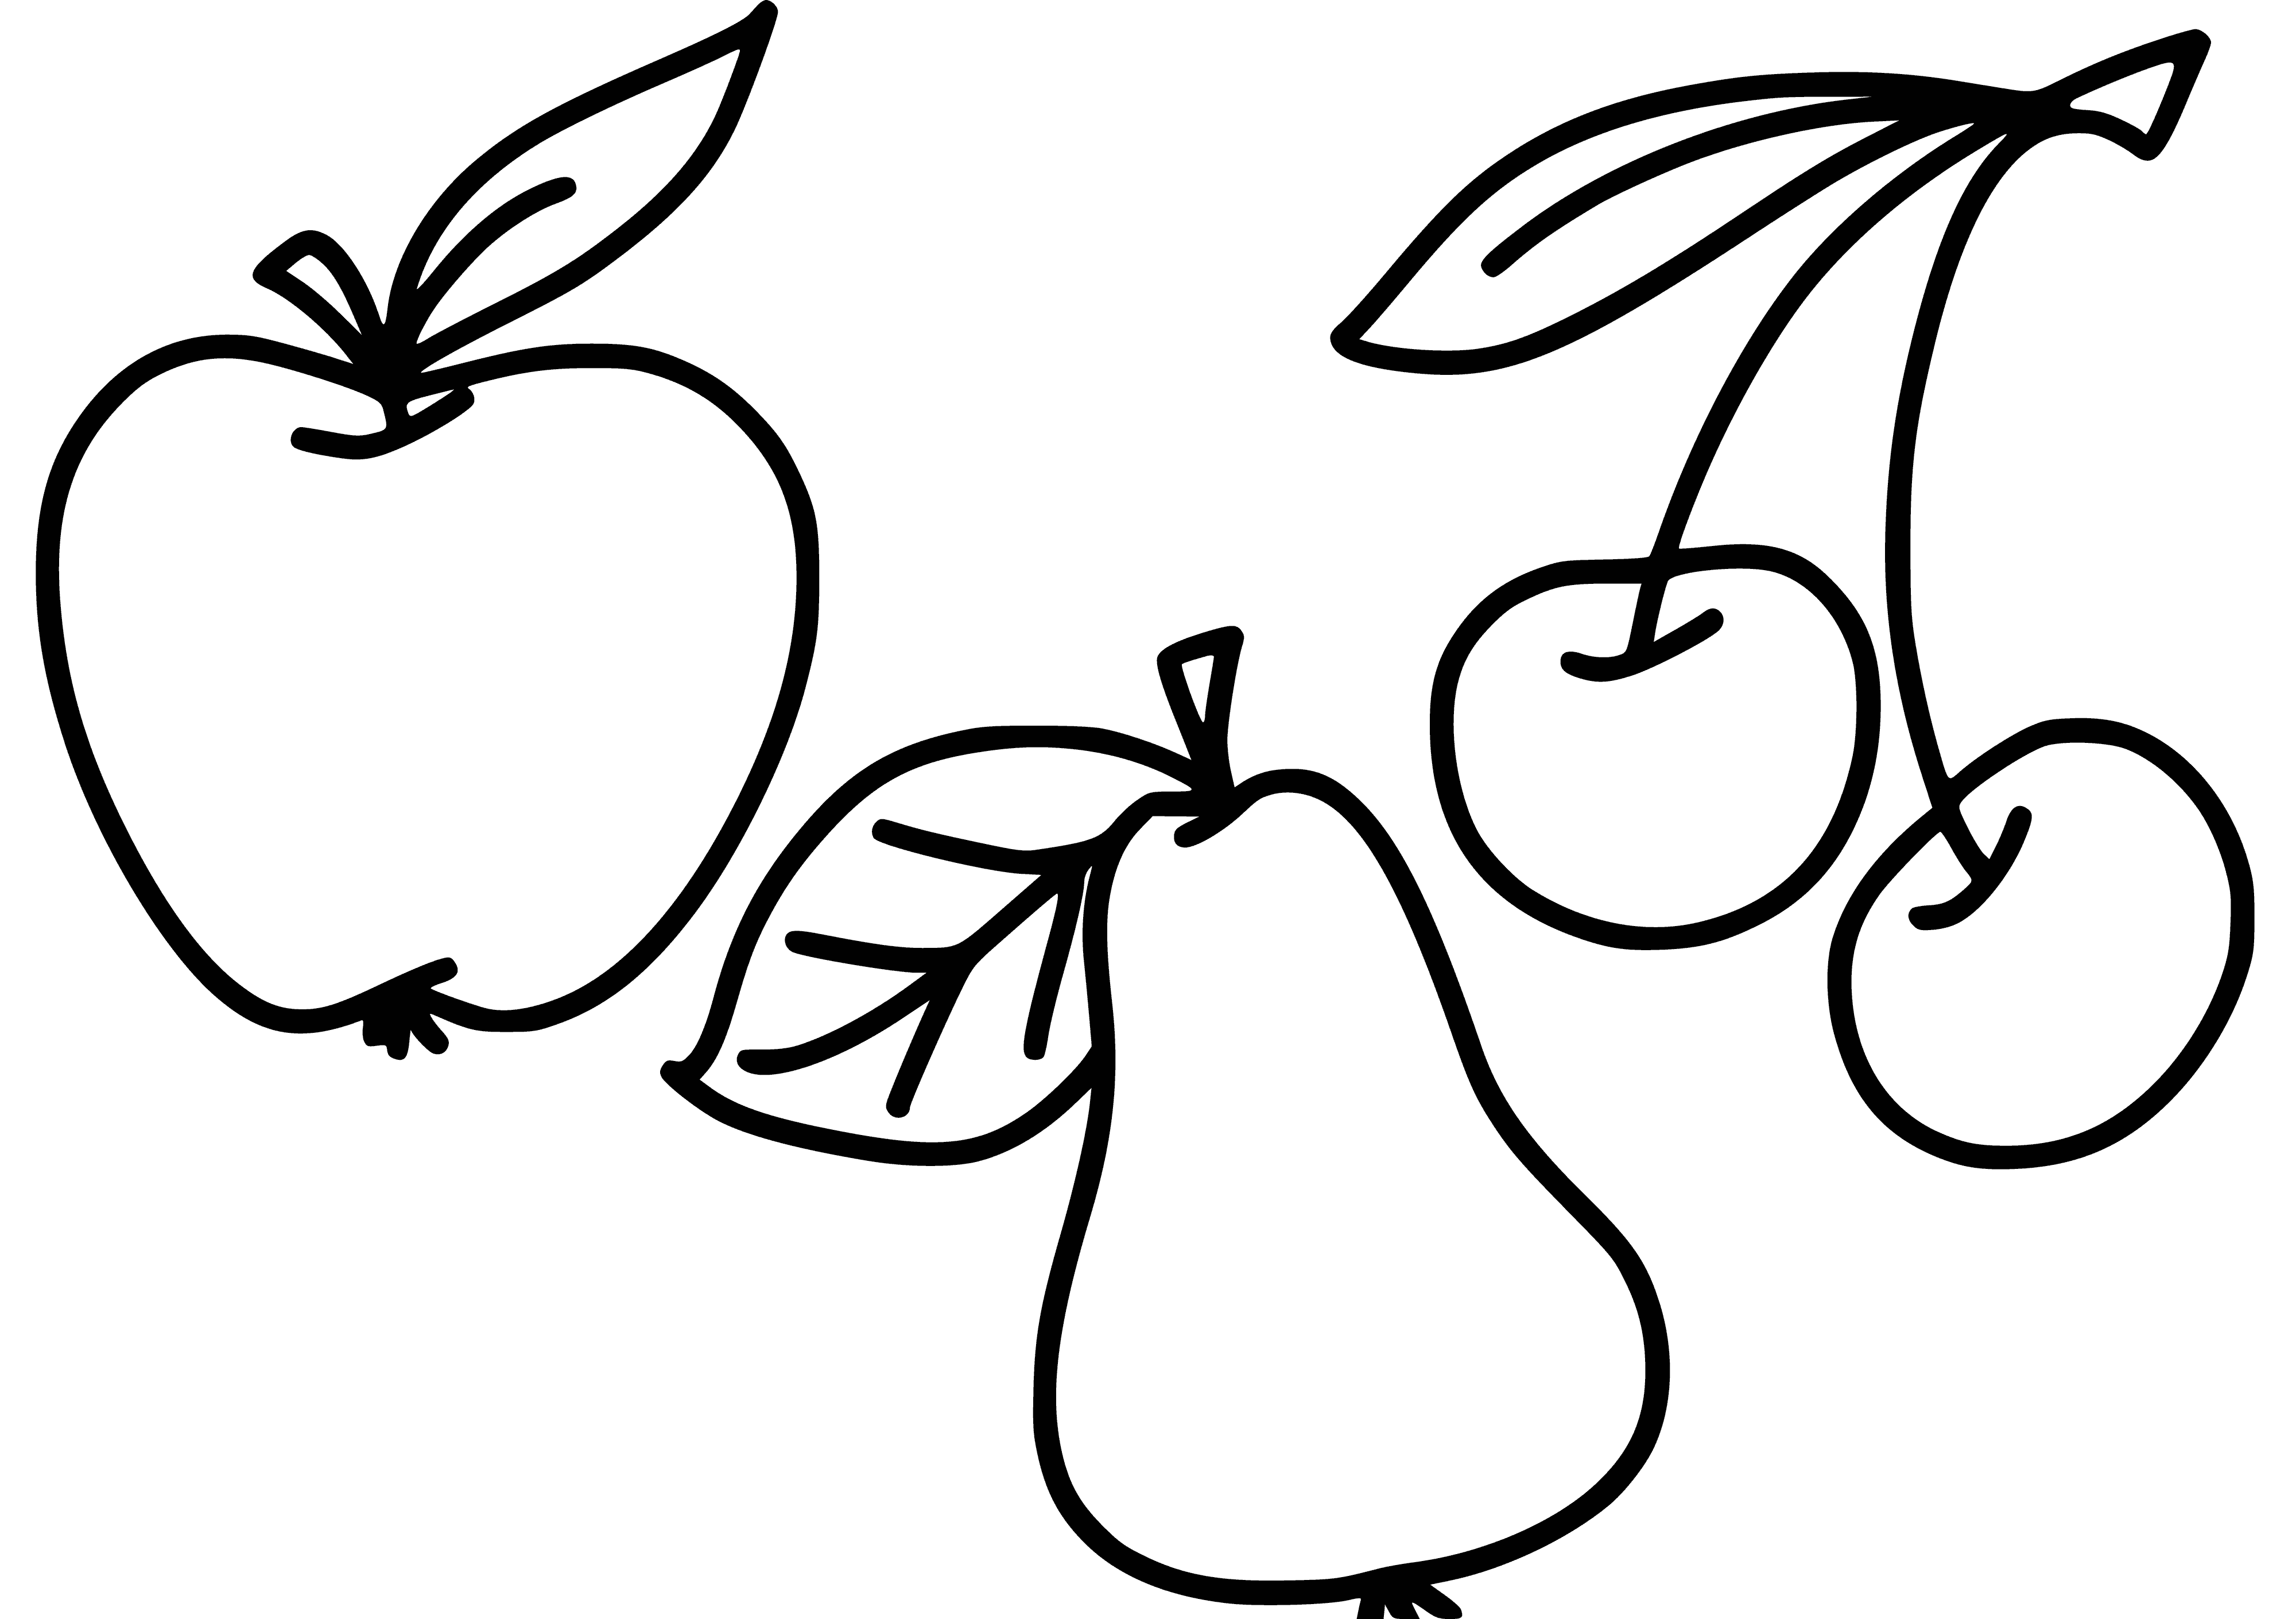 coloring page: 3 fruits: green apple, red apple, yellow banana. Background: white. #coloring #fruits